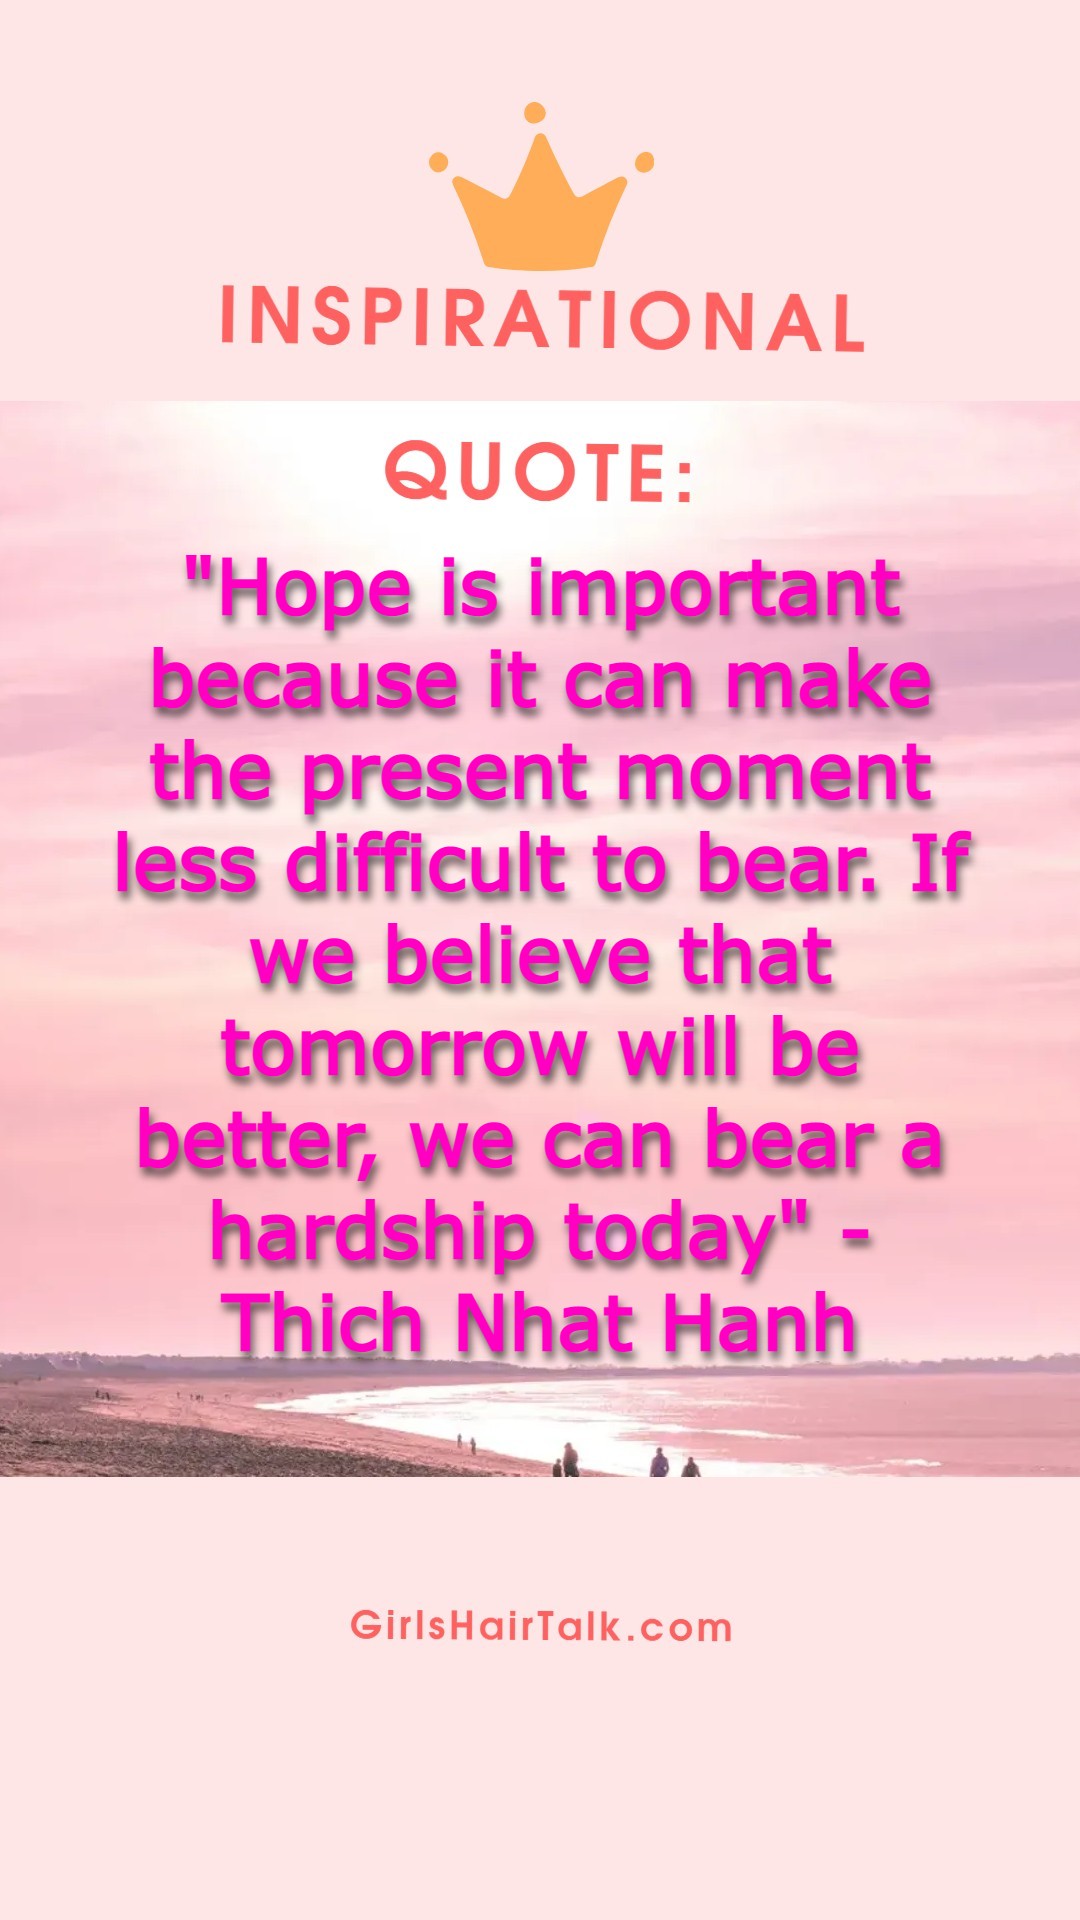 Thich Nhat Hanh cancer quote